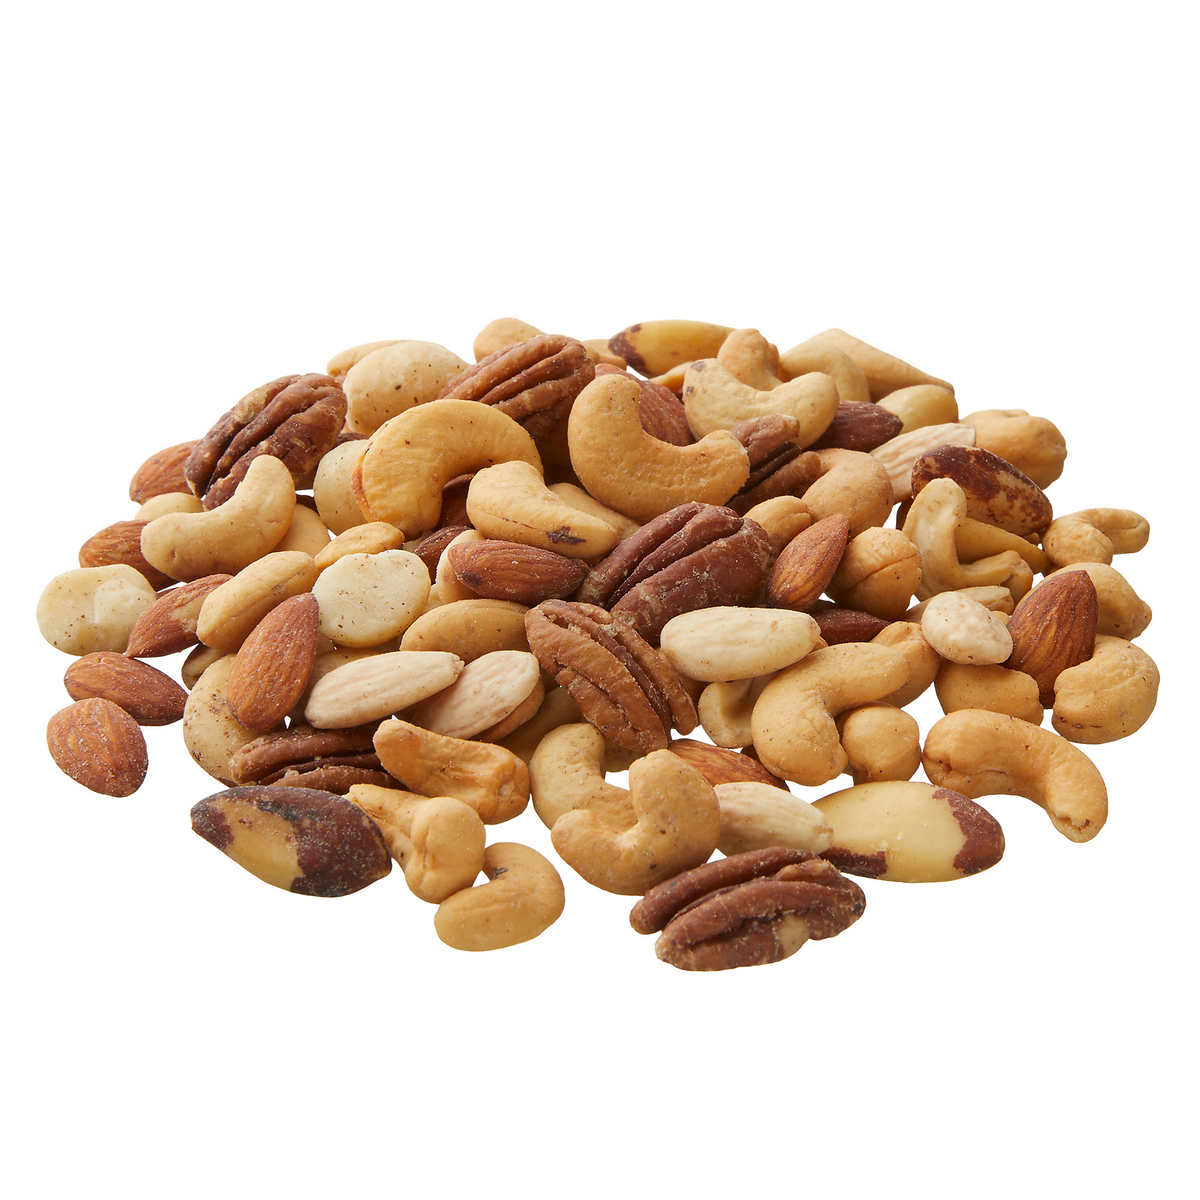 Kirkland Signature Extra Fancy Mixed Nuts, Salted, 2.5 Pounds